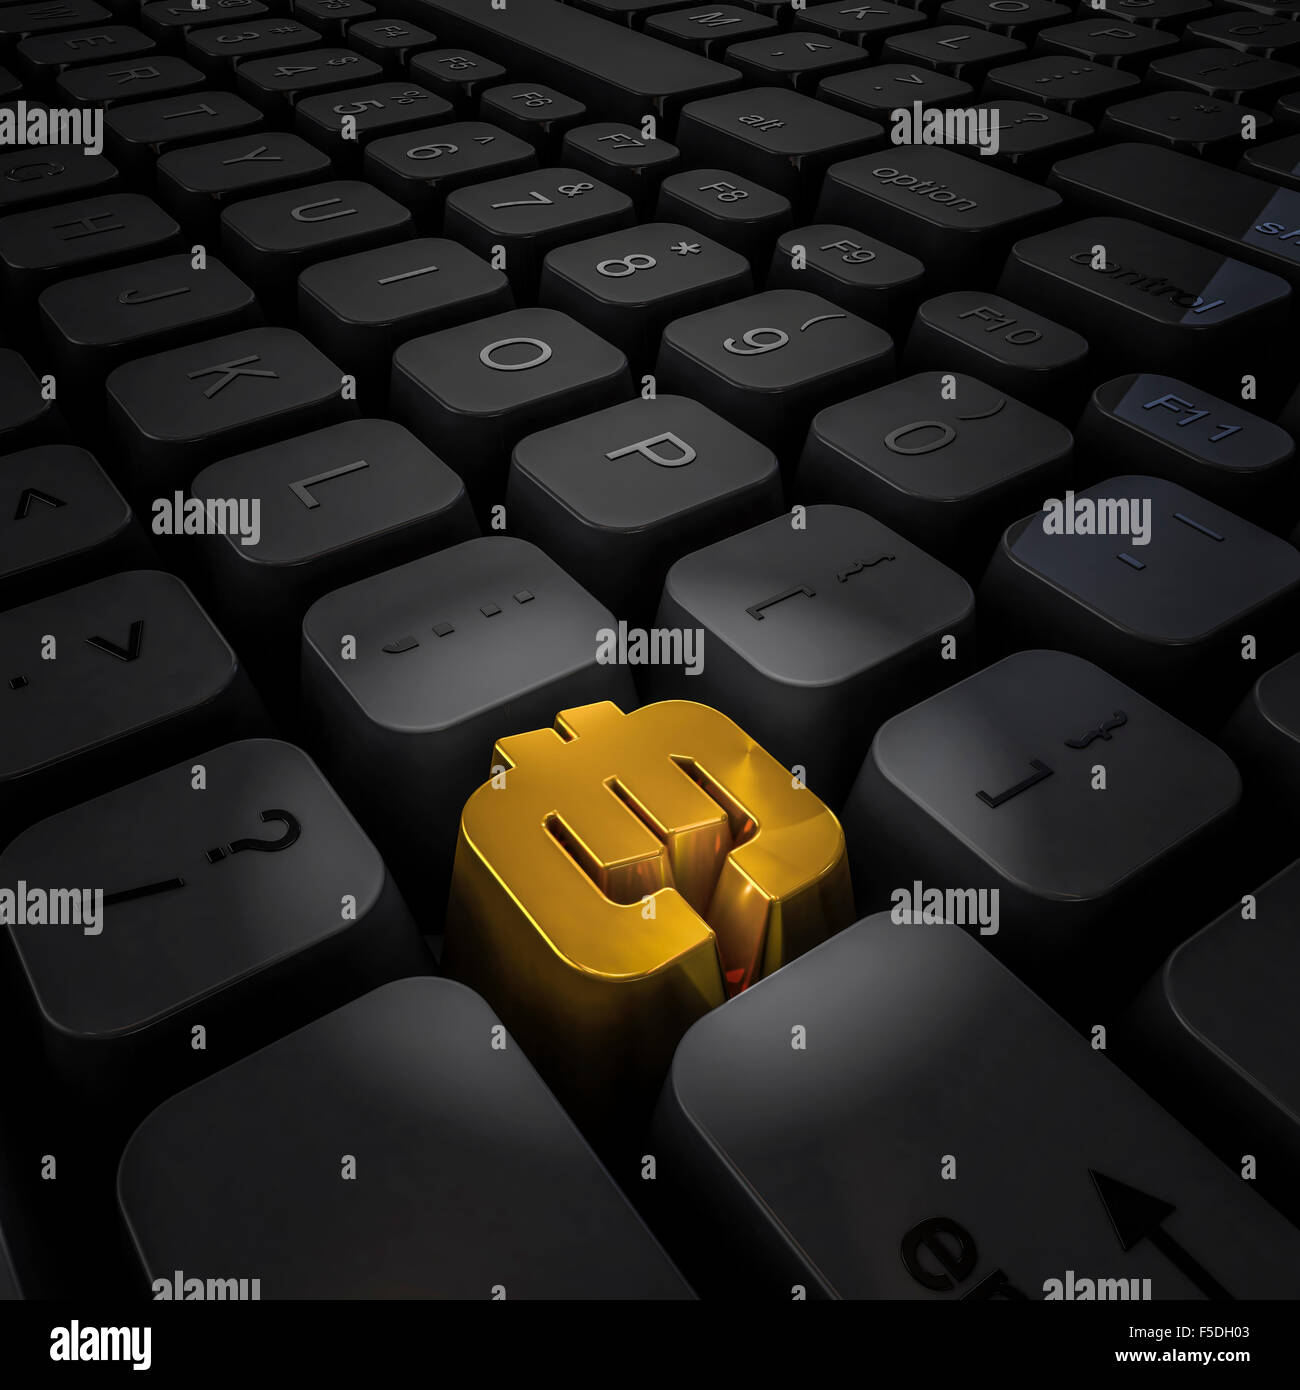 Money key euro / 3D render of computer keyboard with gold euro key Stock Photo